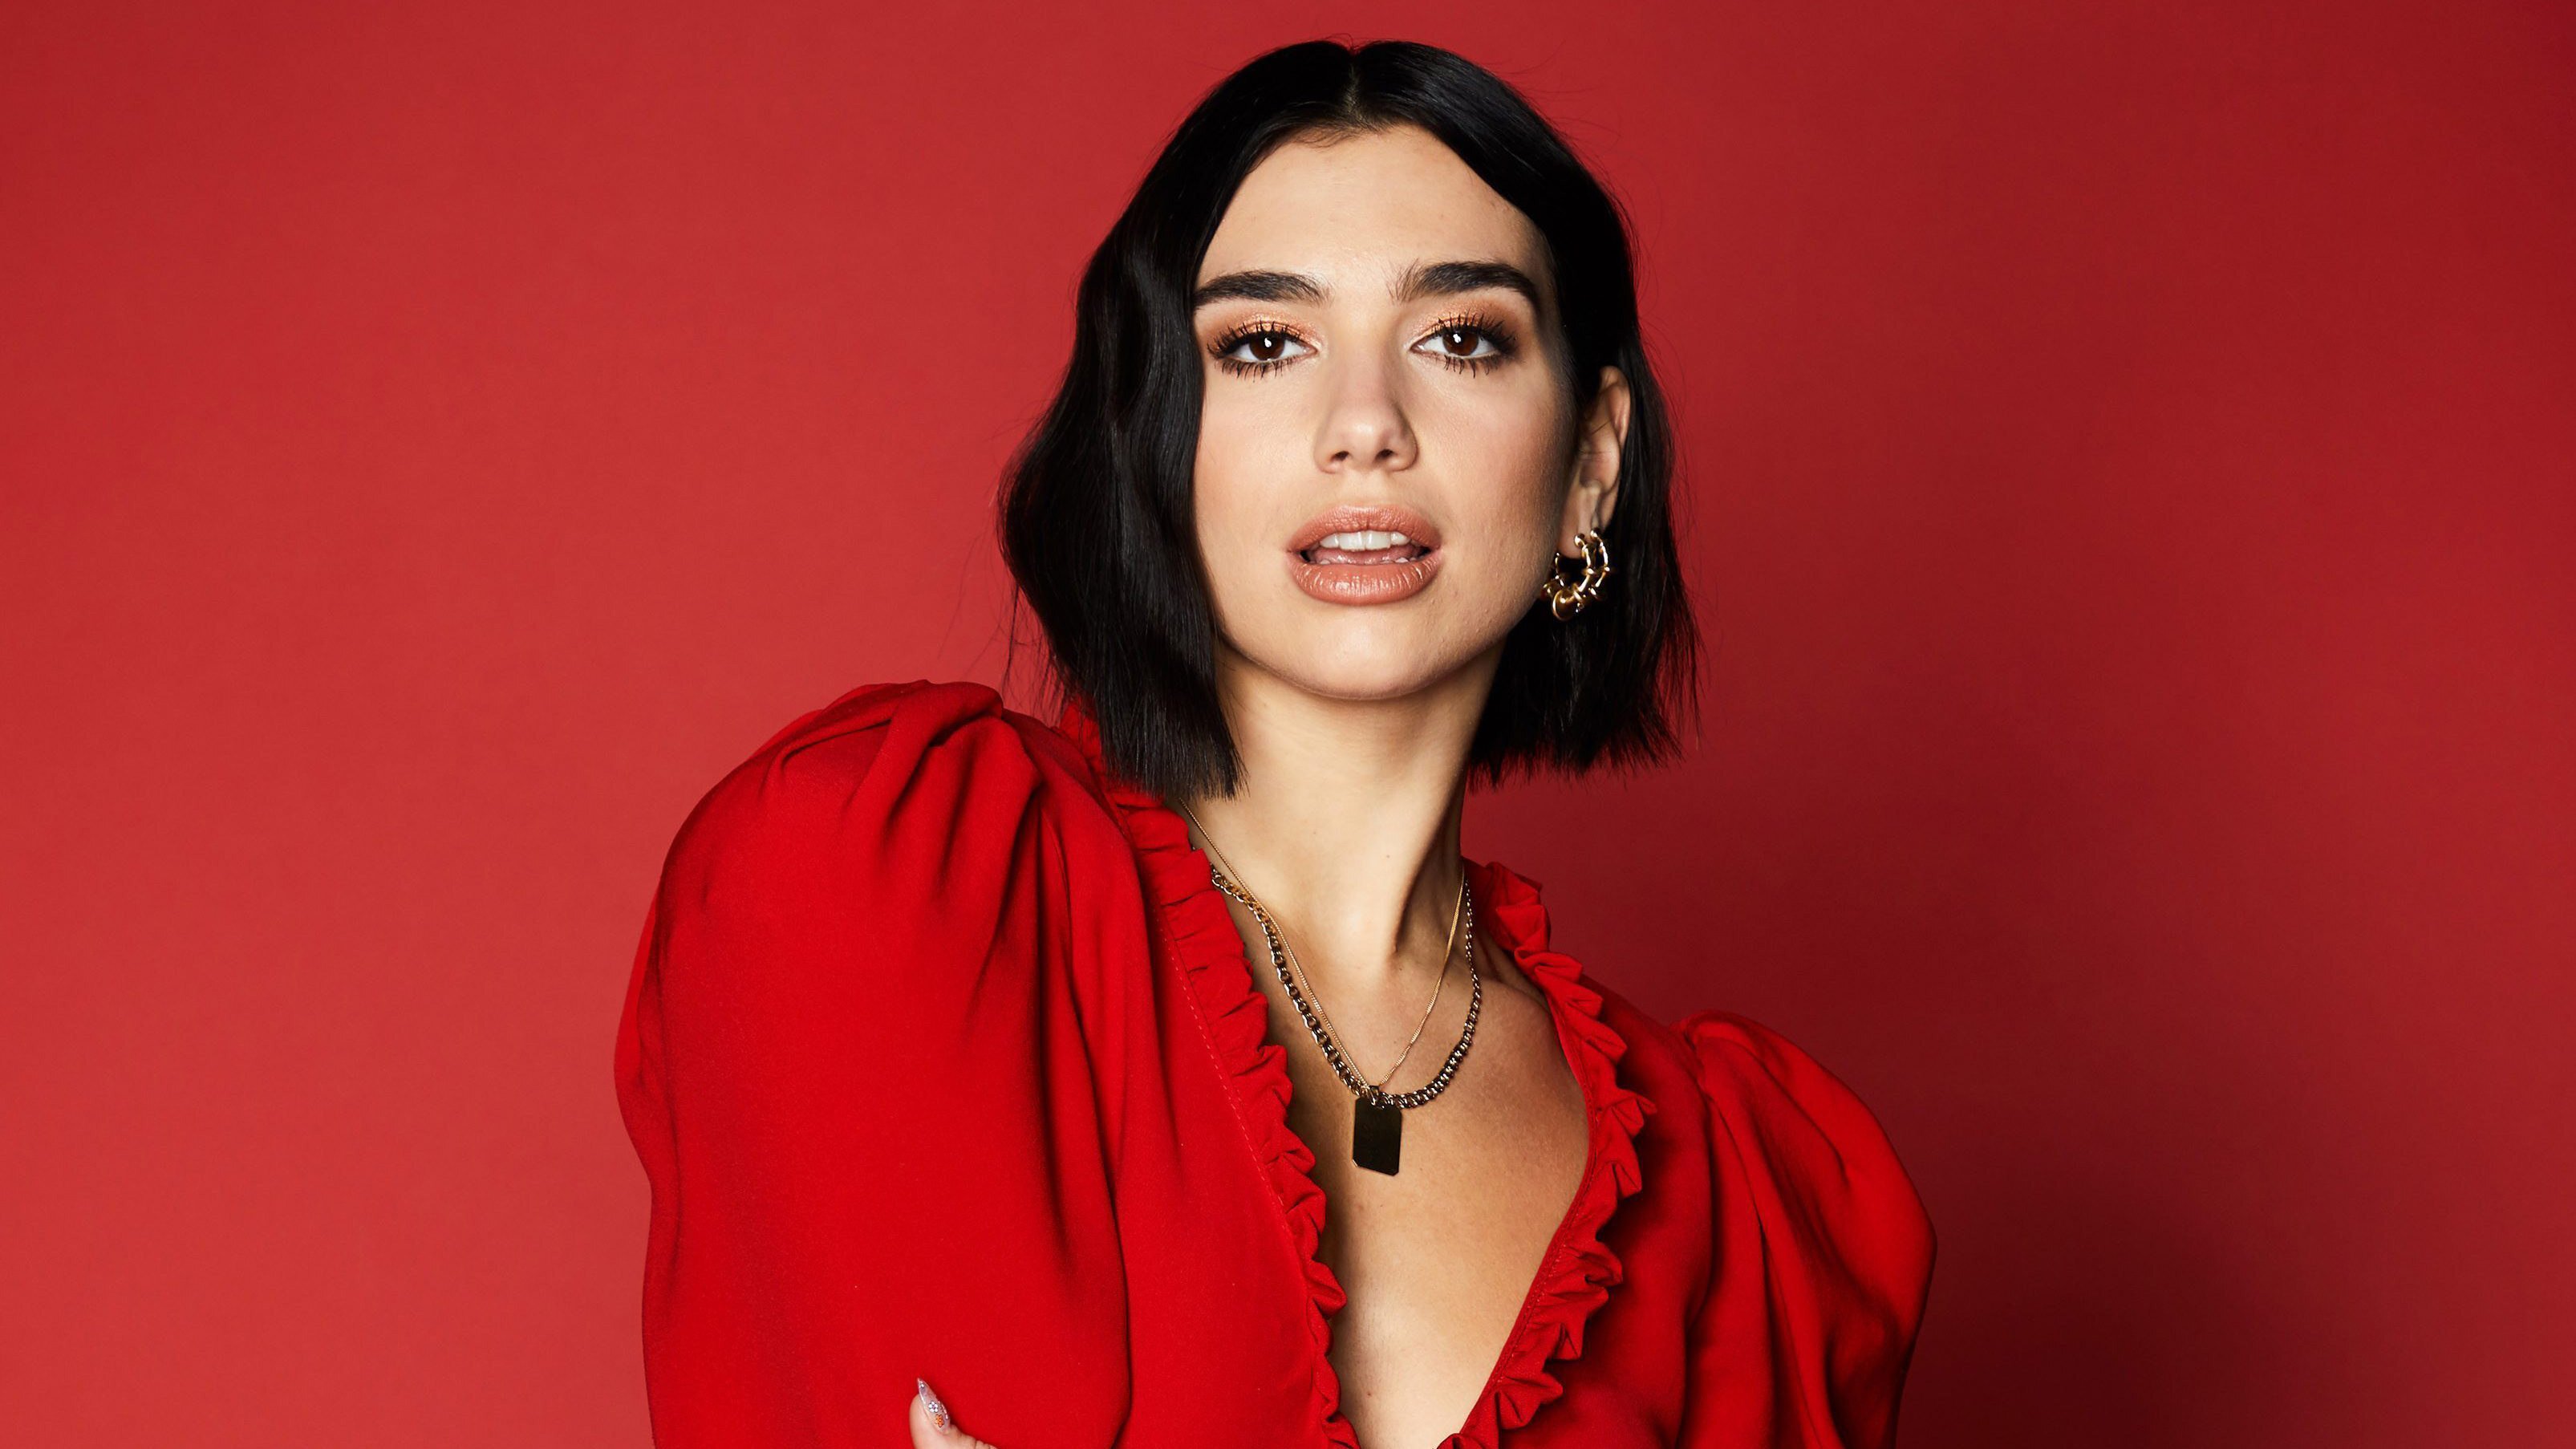 Dua Lipa is a reliably glamorous presence on magazine covers and in music videos. Photo: Instagram